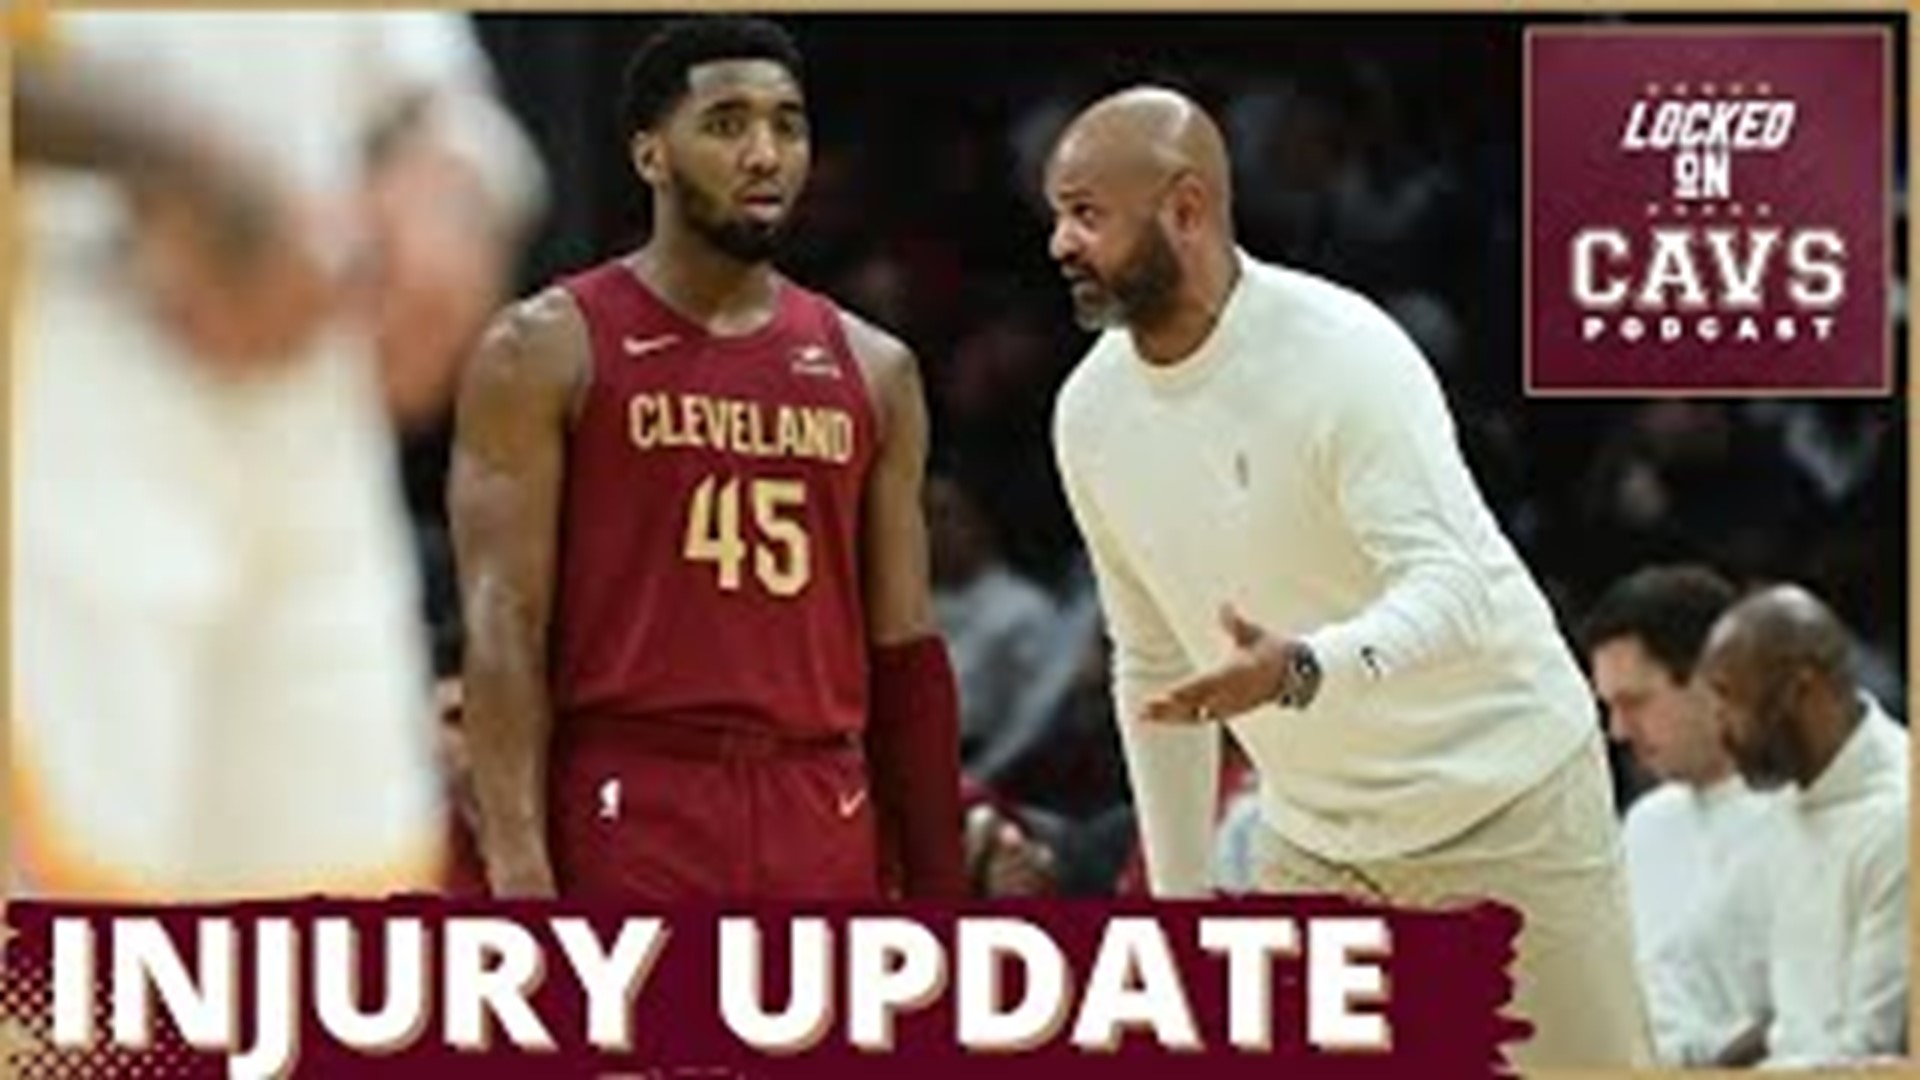 On a new episode of Locked on Cavs hosts Chris Manning and Evan Dammarell discuss the Cavs' injury issues and how thin the team is at the moment.